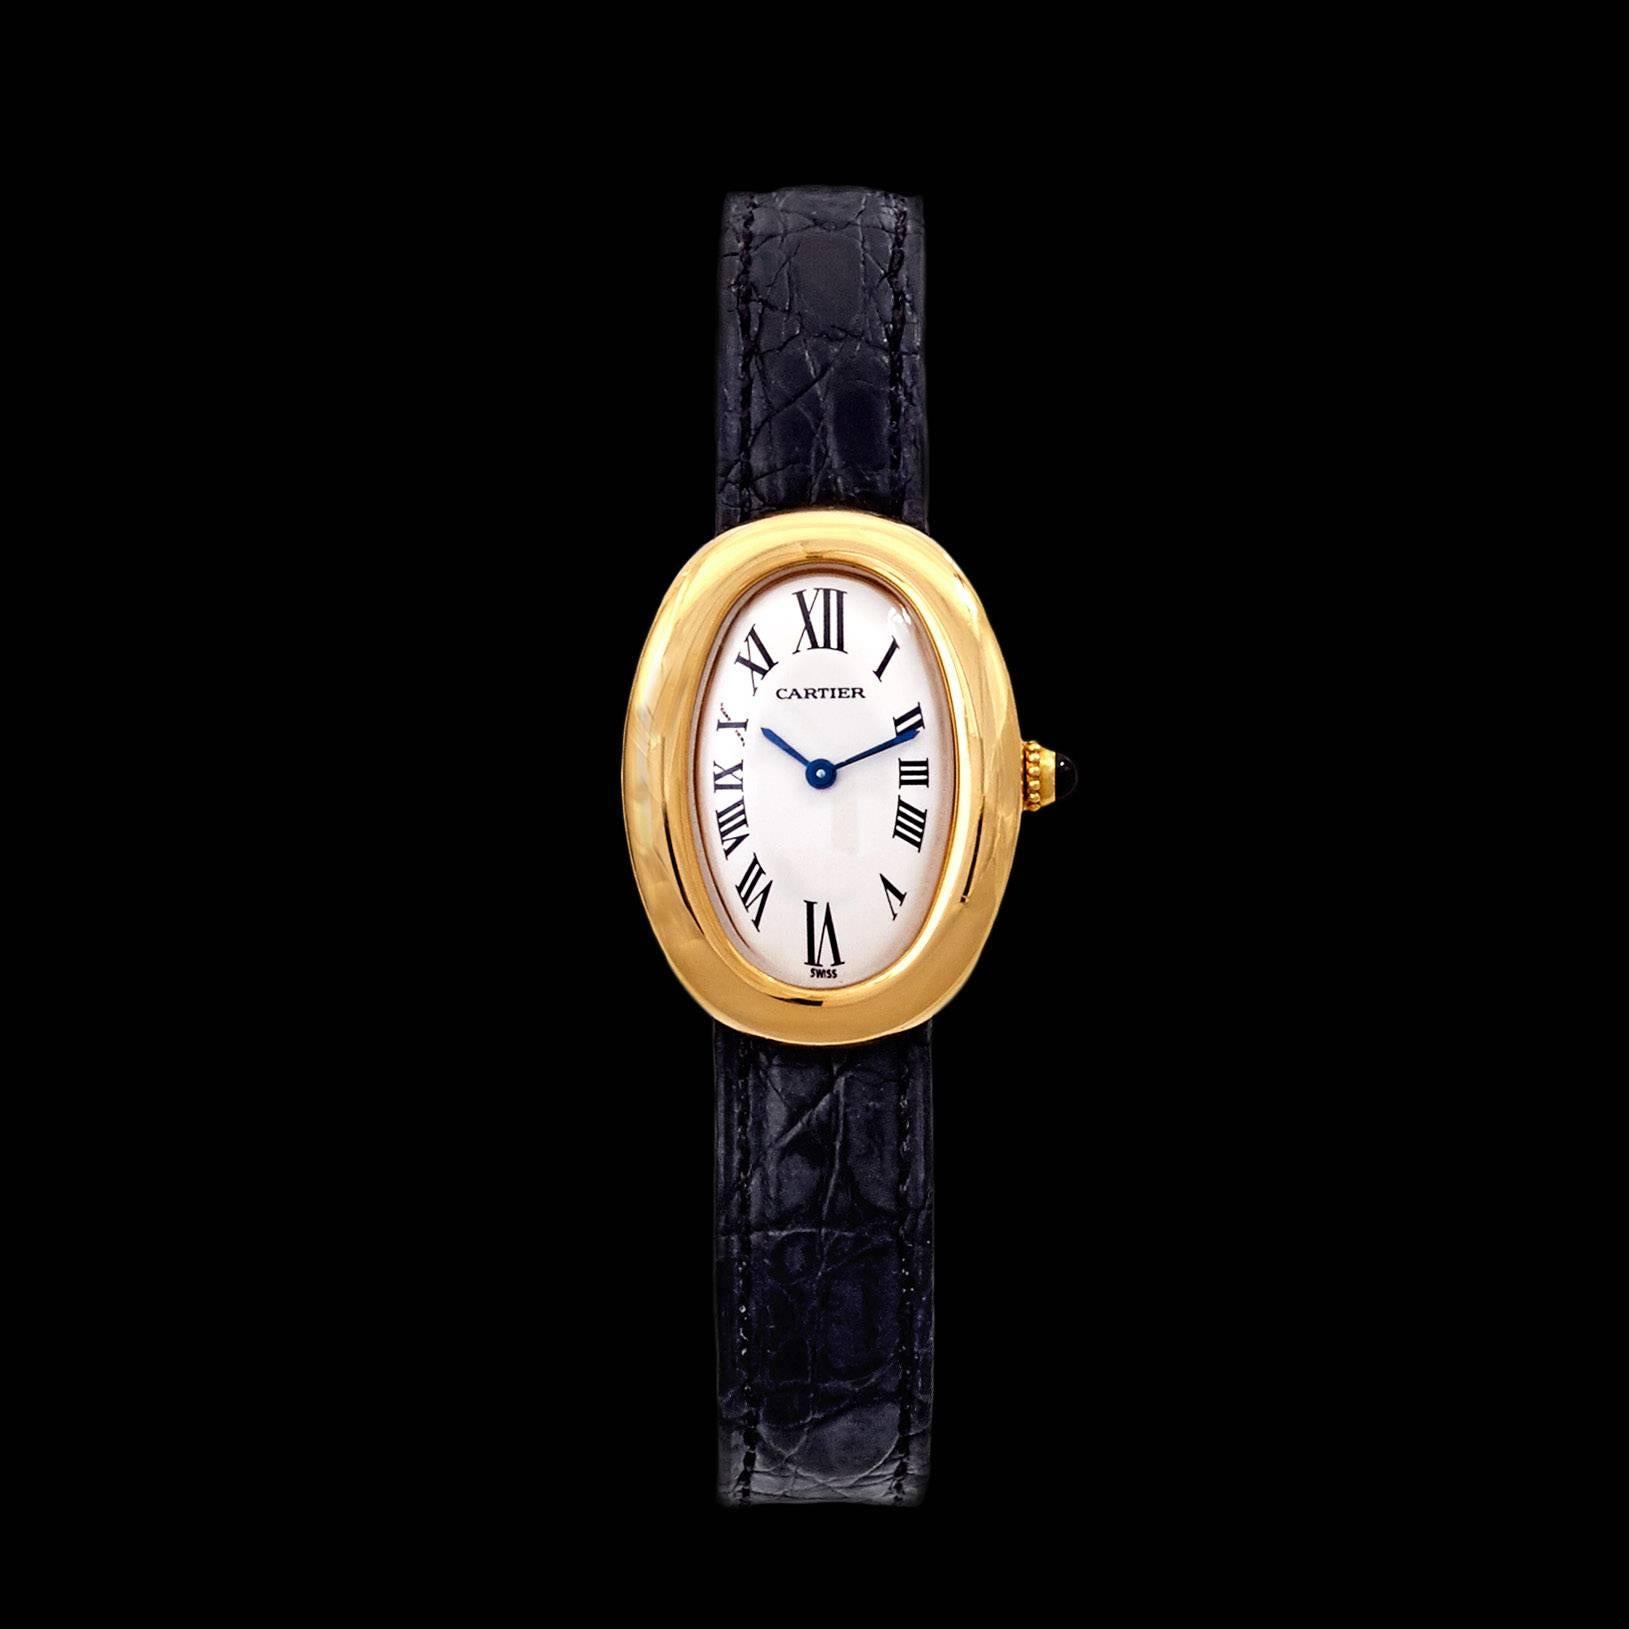 Cartier 18Kt Yellow Gold Baignoire Watch on a Caiman Leather strap with a Deployant Buckle. Small size model measuring 31.6 mm x 24.5 mm and features a sapphire cabochon on the crown of watch. The watch weighs 35.9 grams total.